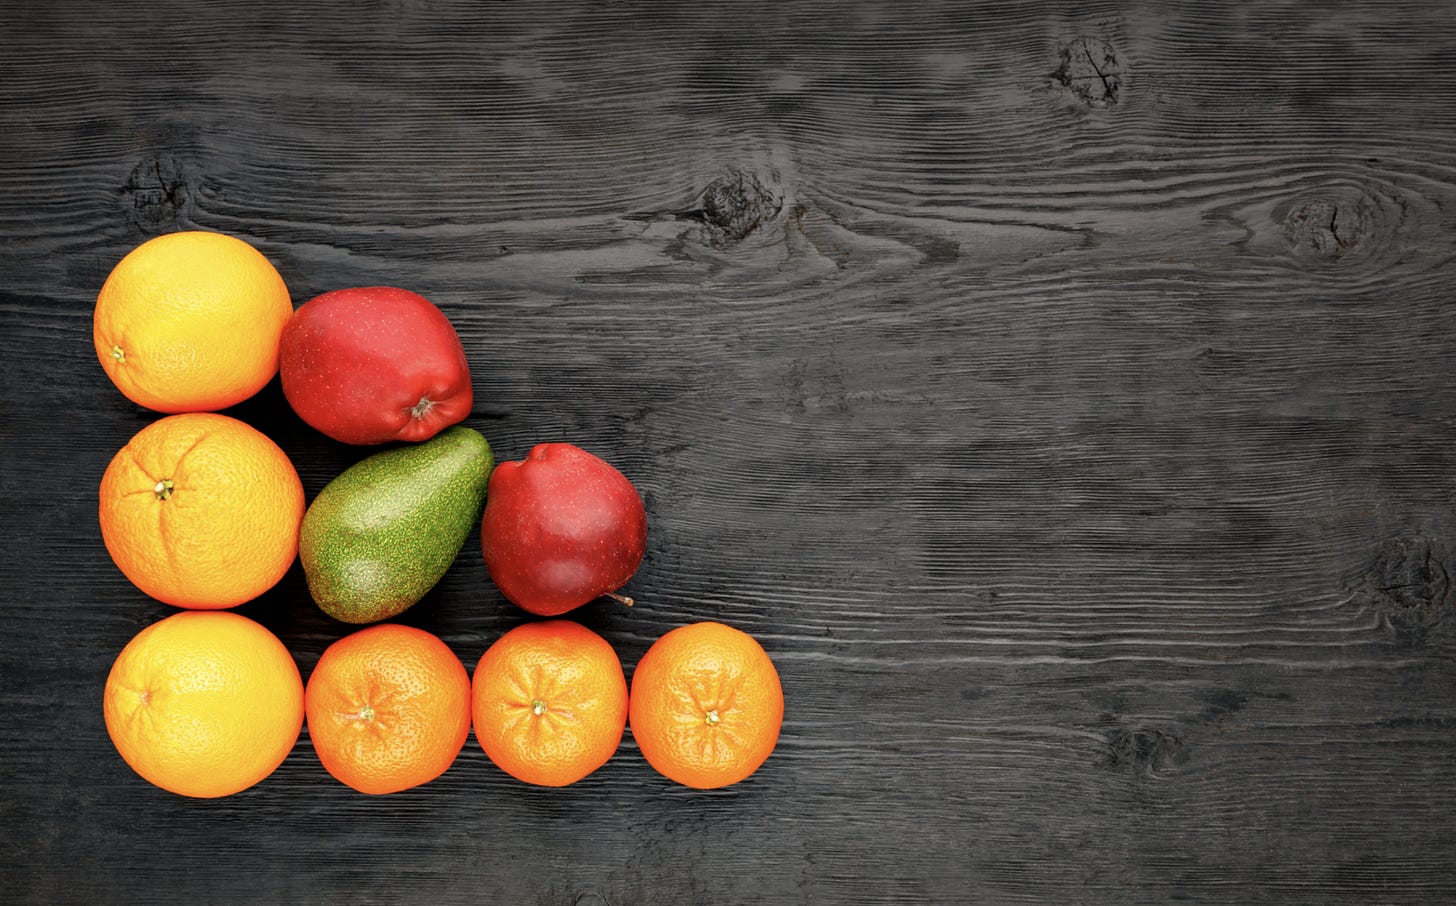 Ripe fruits and citrus fruits lie on an old black wooden table.